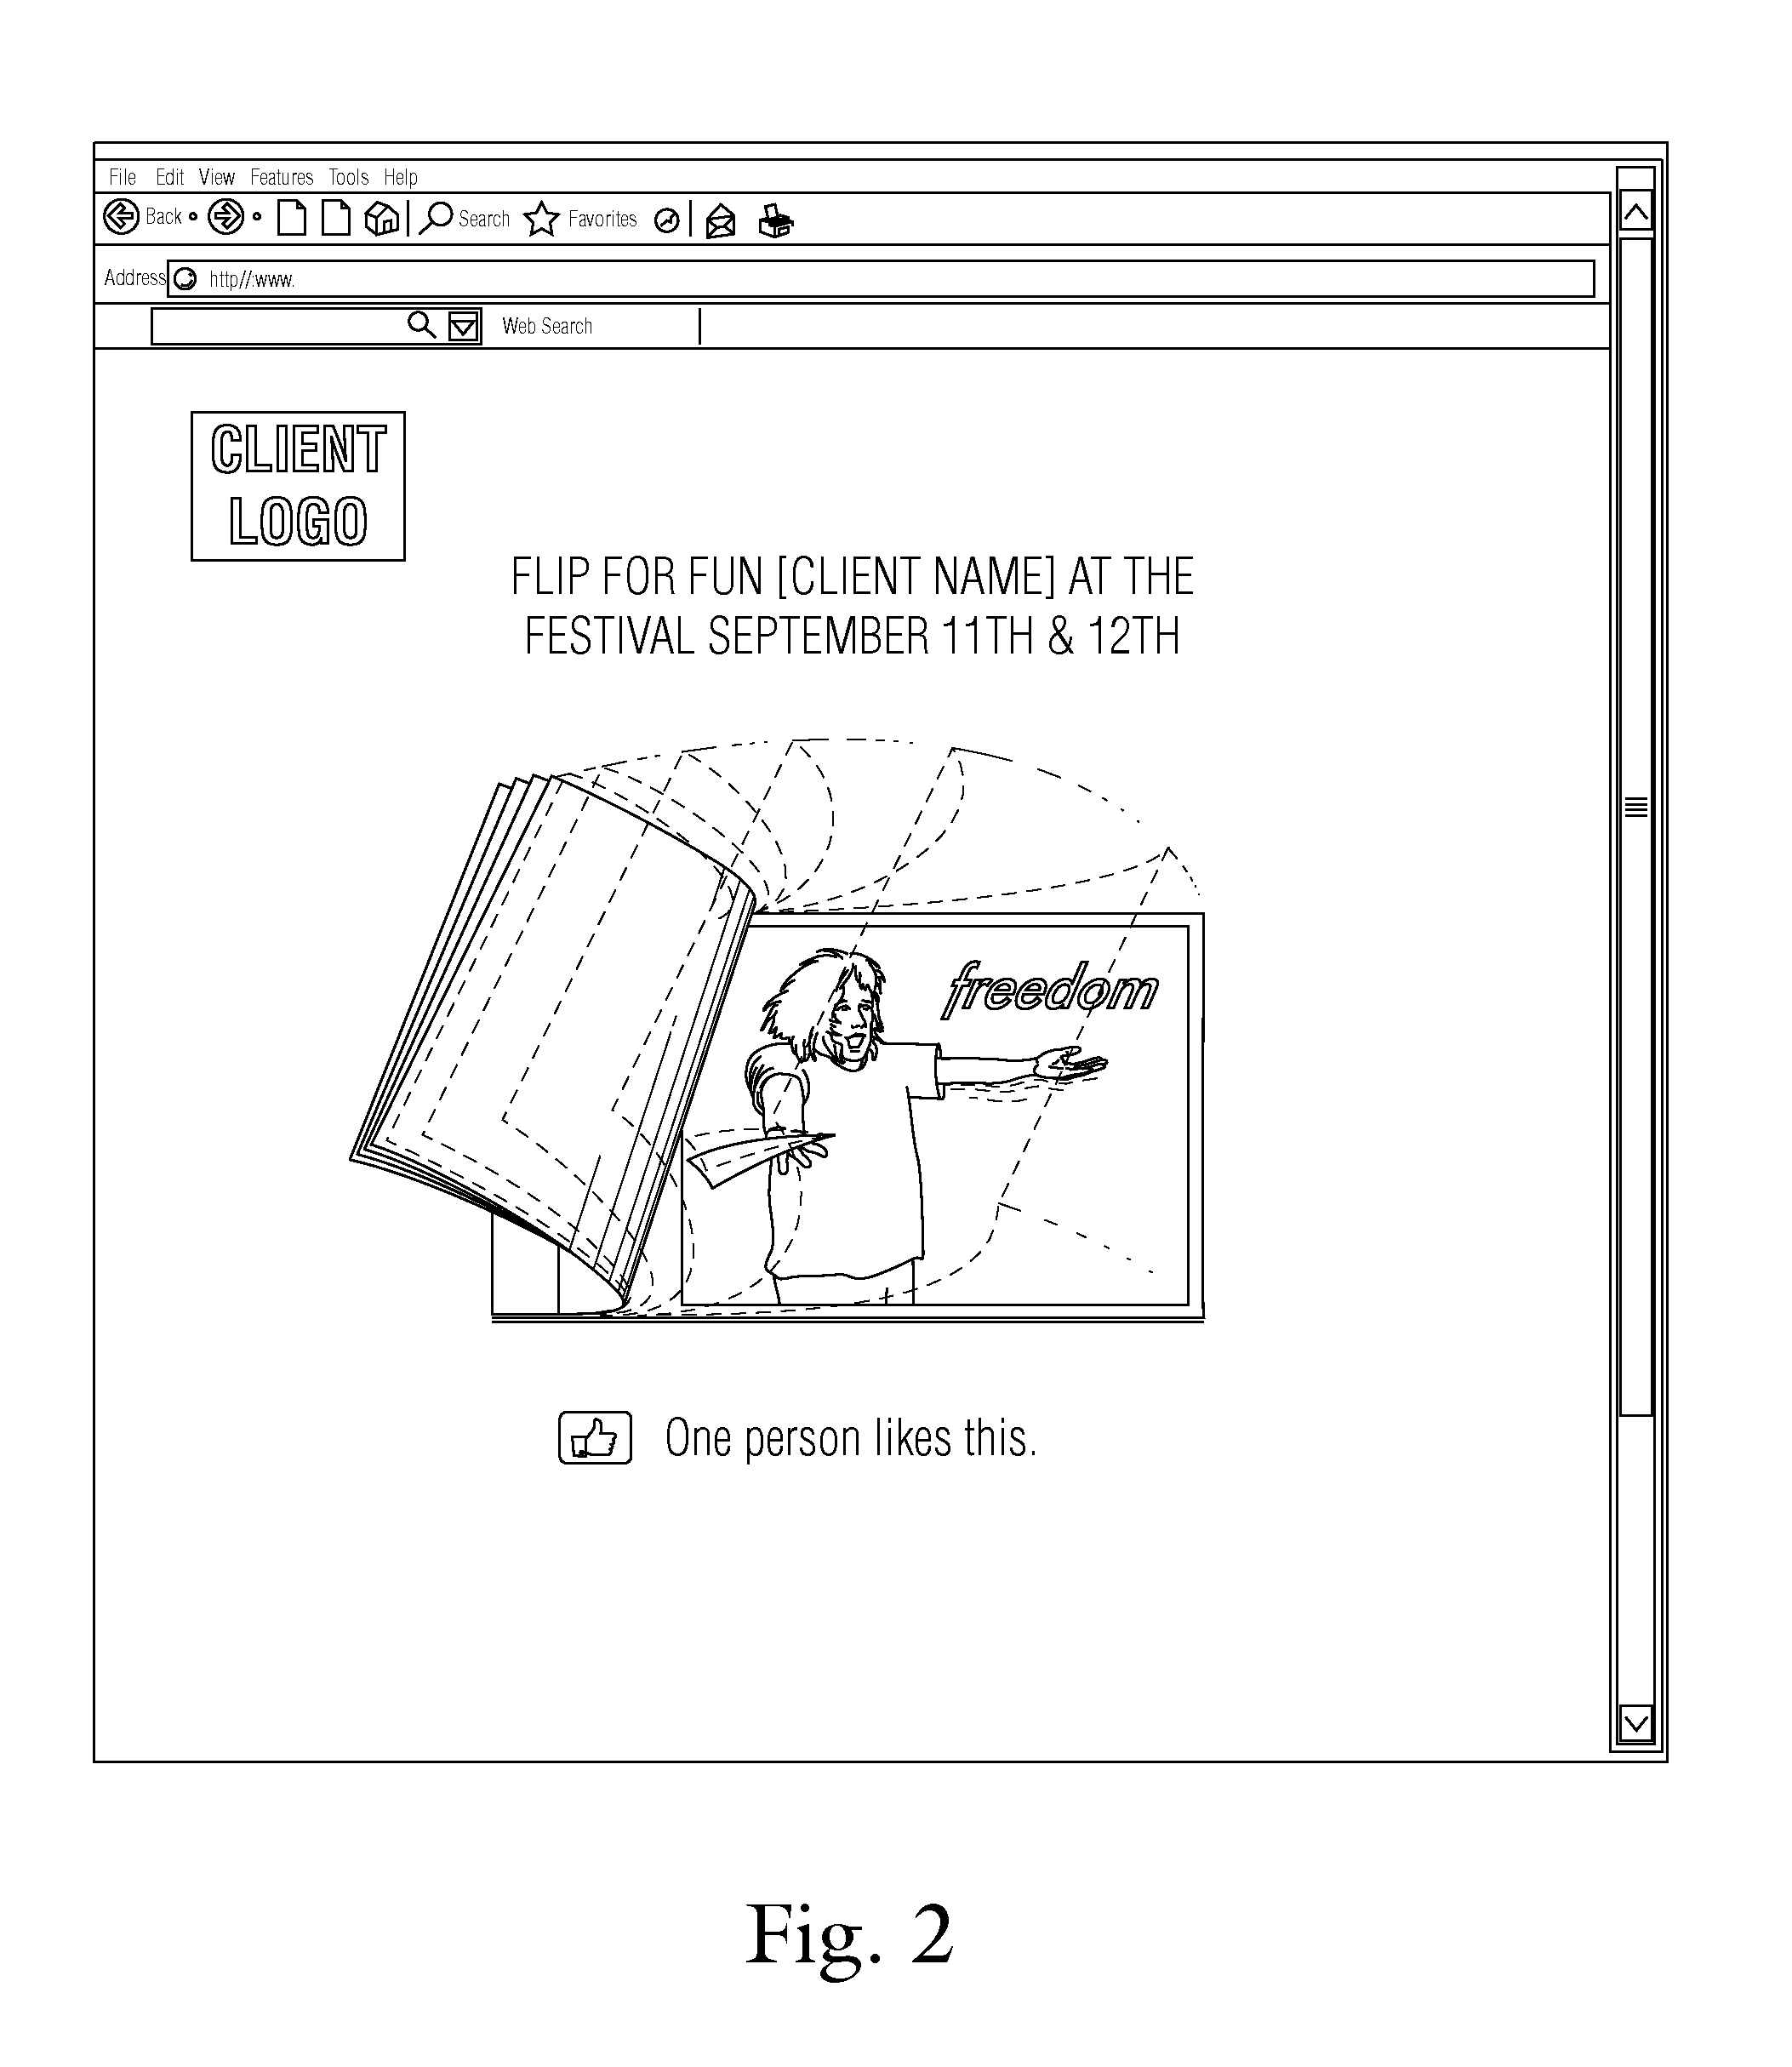 Electronic flipbook systems and methods